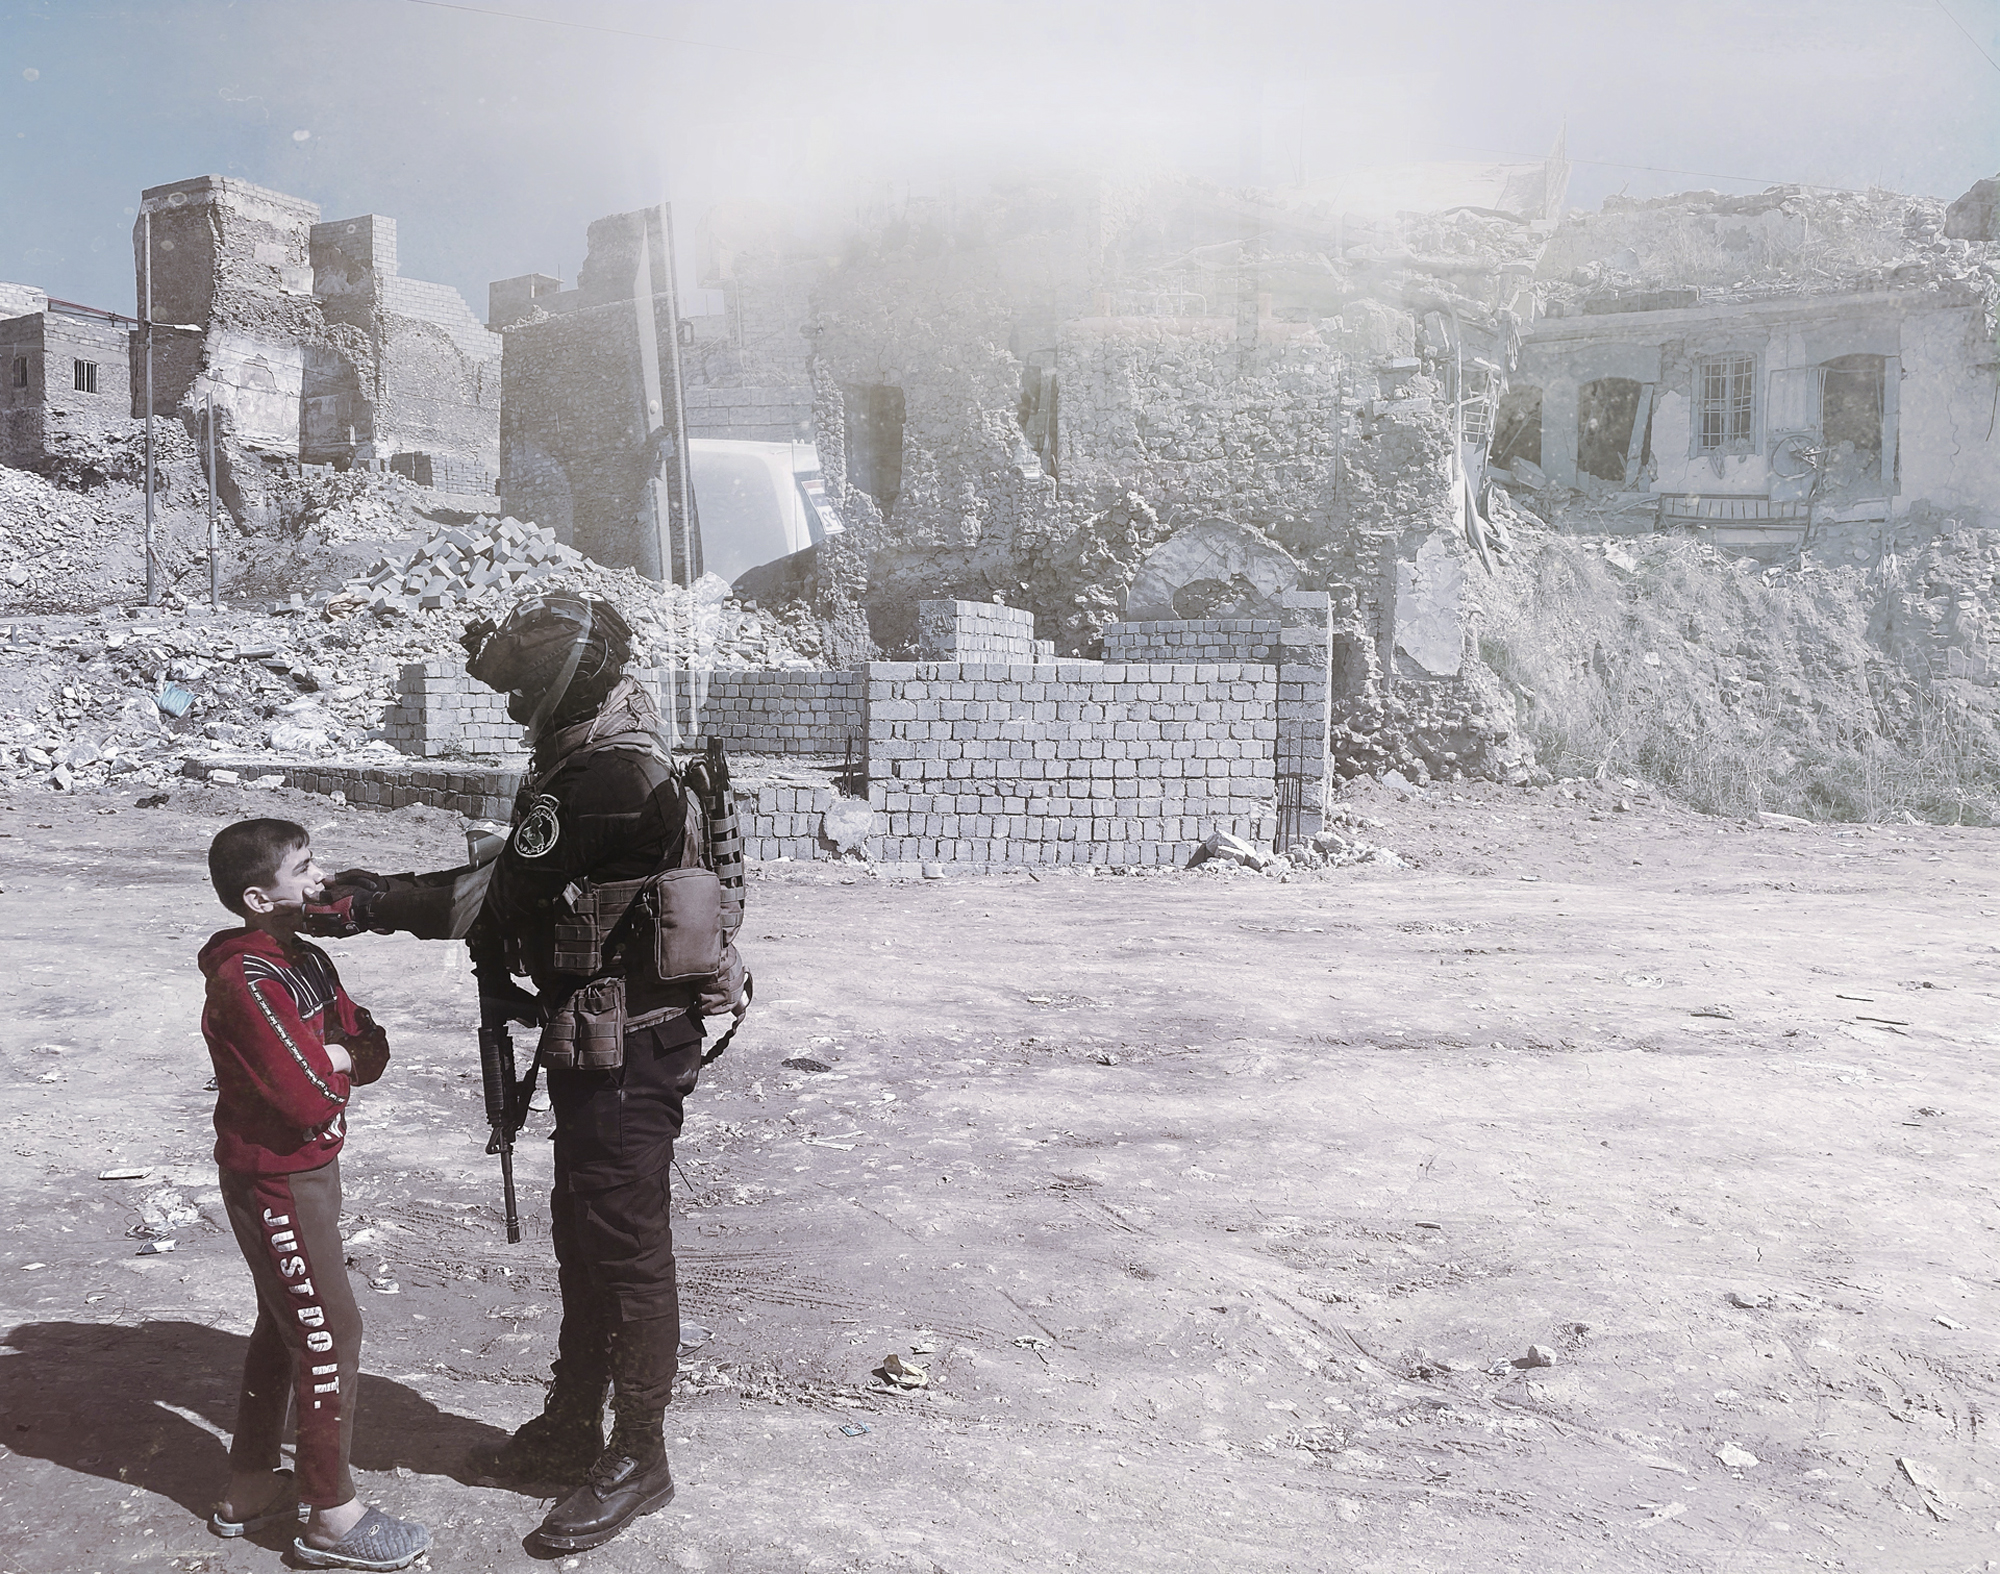 A soldier talking to a little boy in front of the ruins